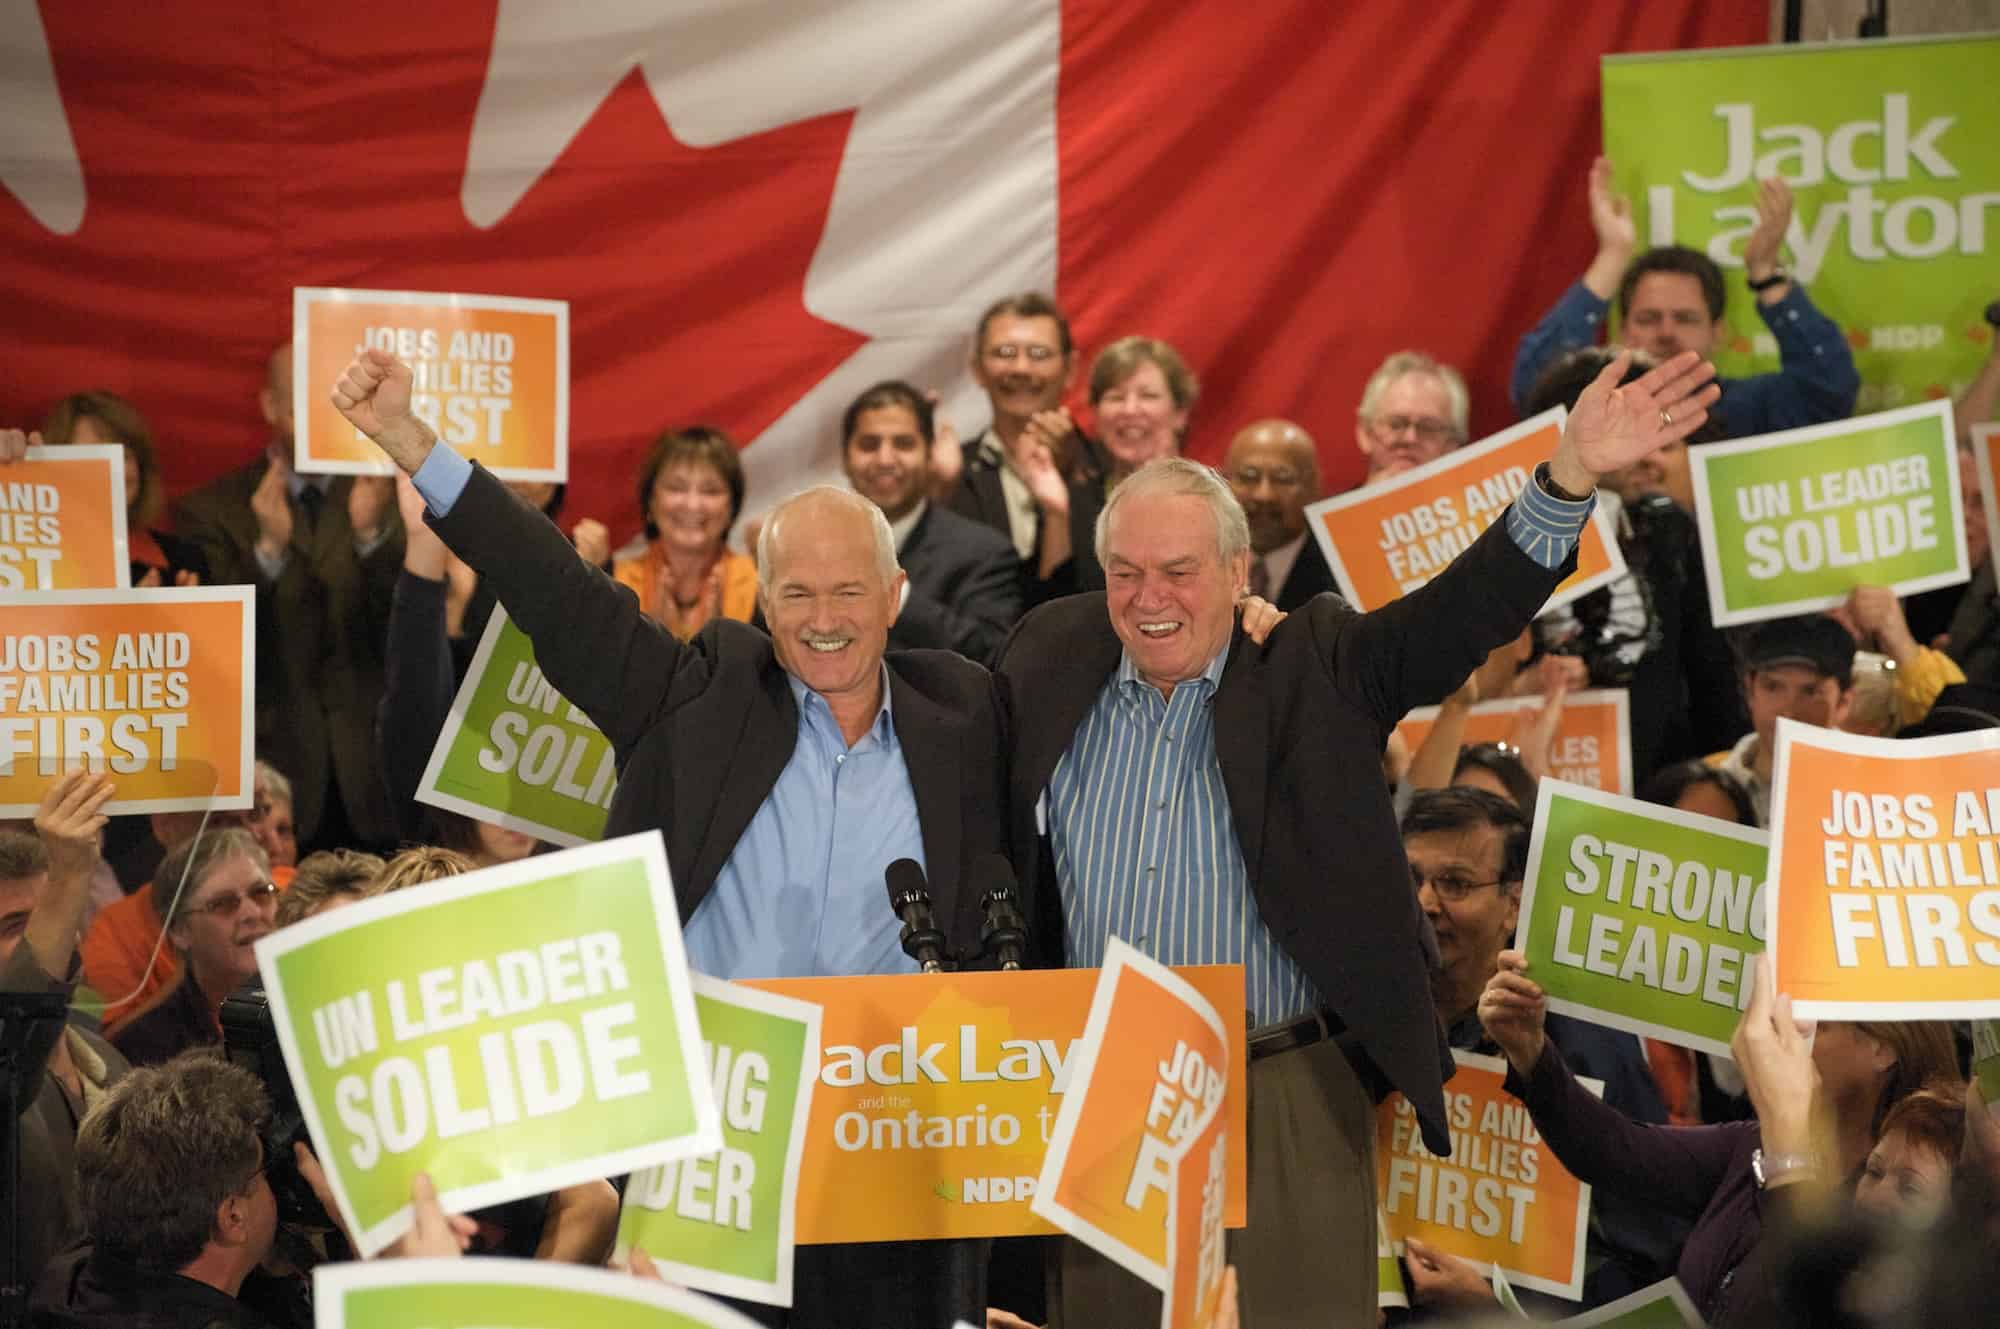 Jack Layton with Ed Broadbent during the 2008 federal election on stage among a crowd of supporters.